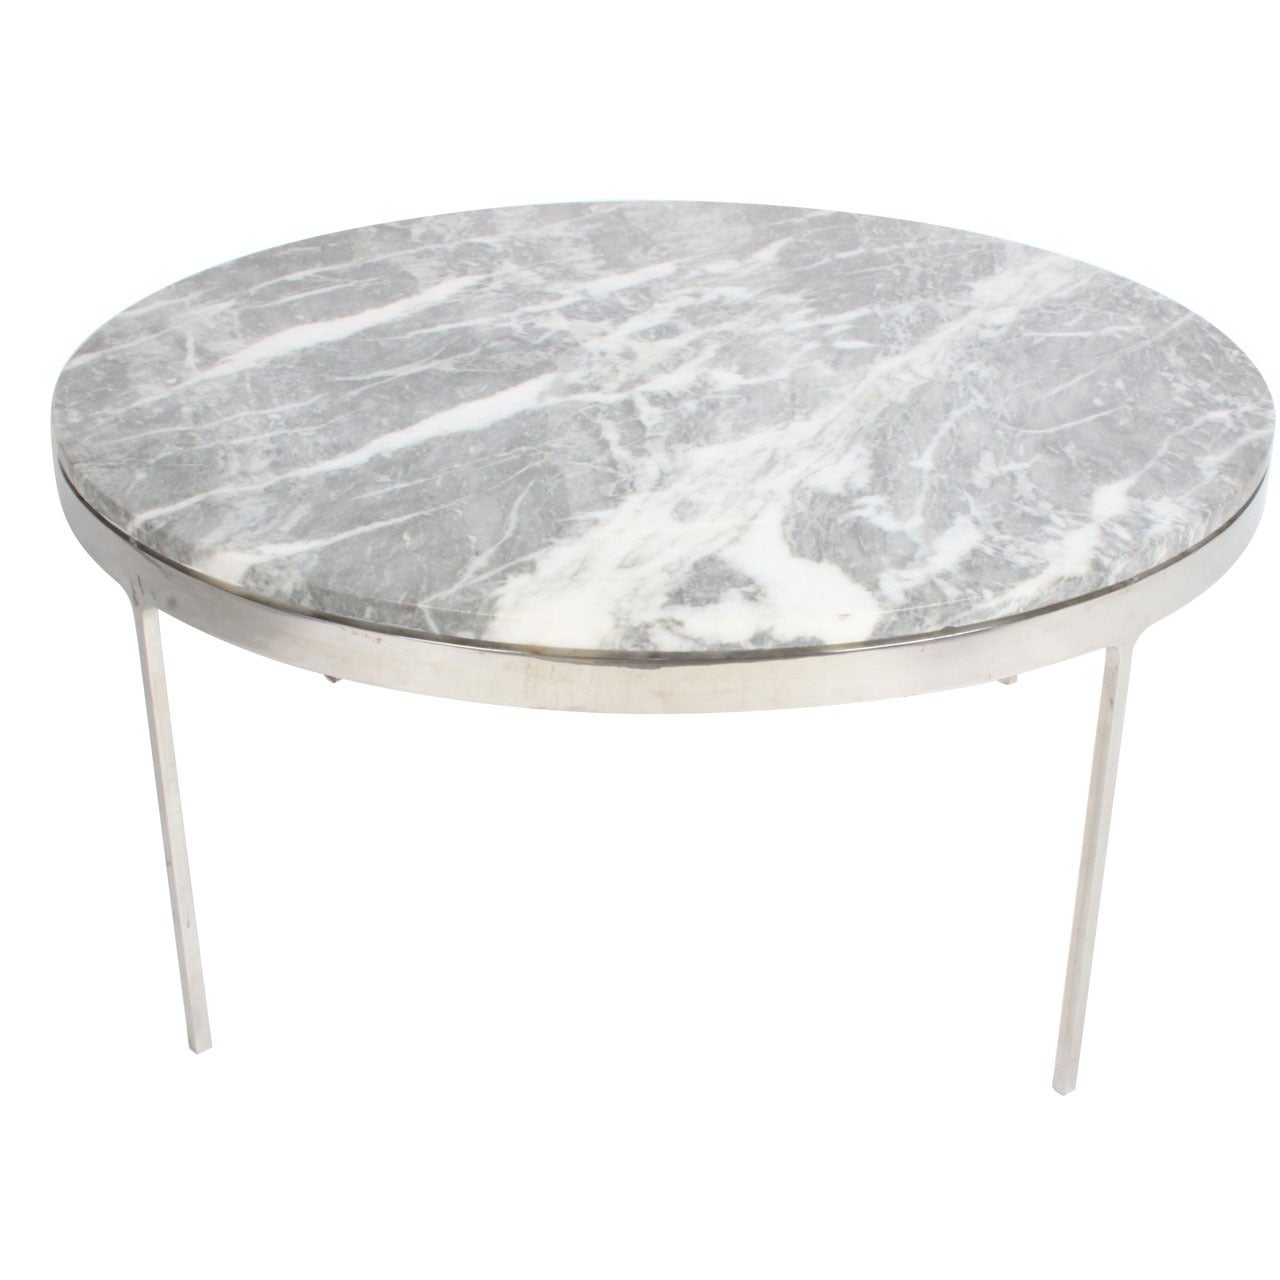 Nicos Zographos Coffee Tables 'One Marble or One Glass Top'